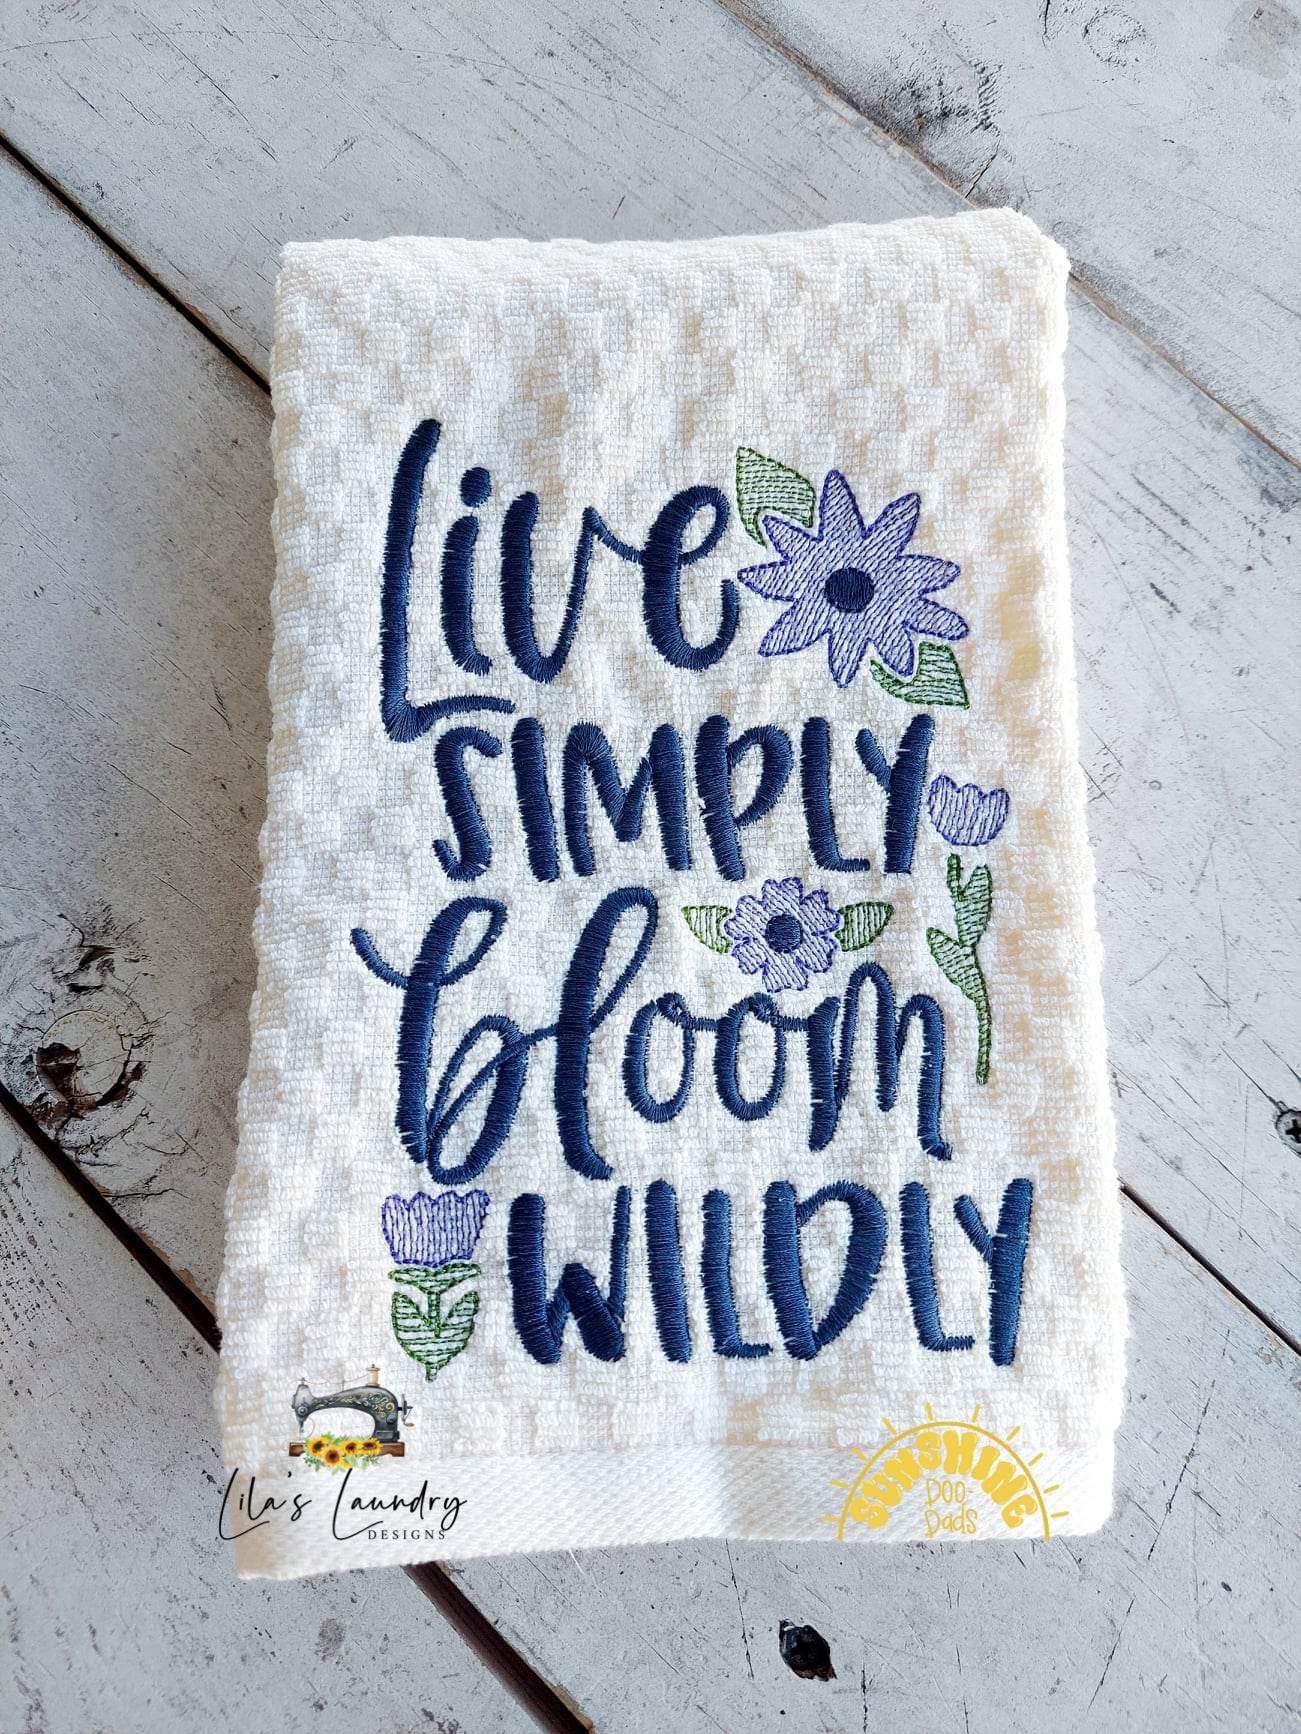 Live Simply Bloom Wildly - 4 sizes- Digital Embroidery Design